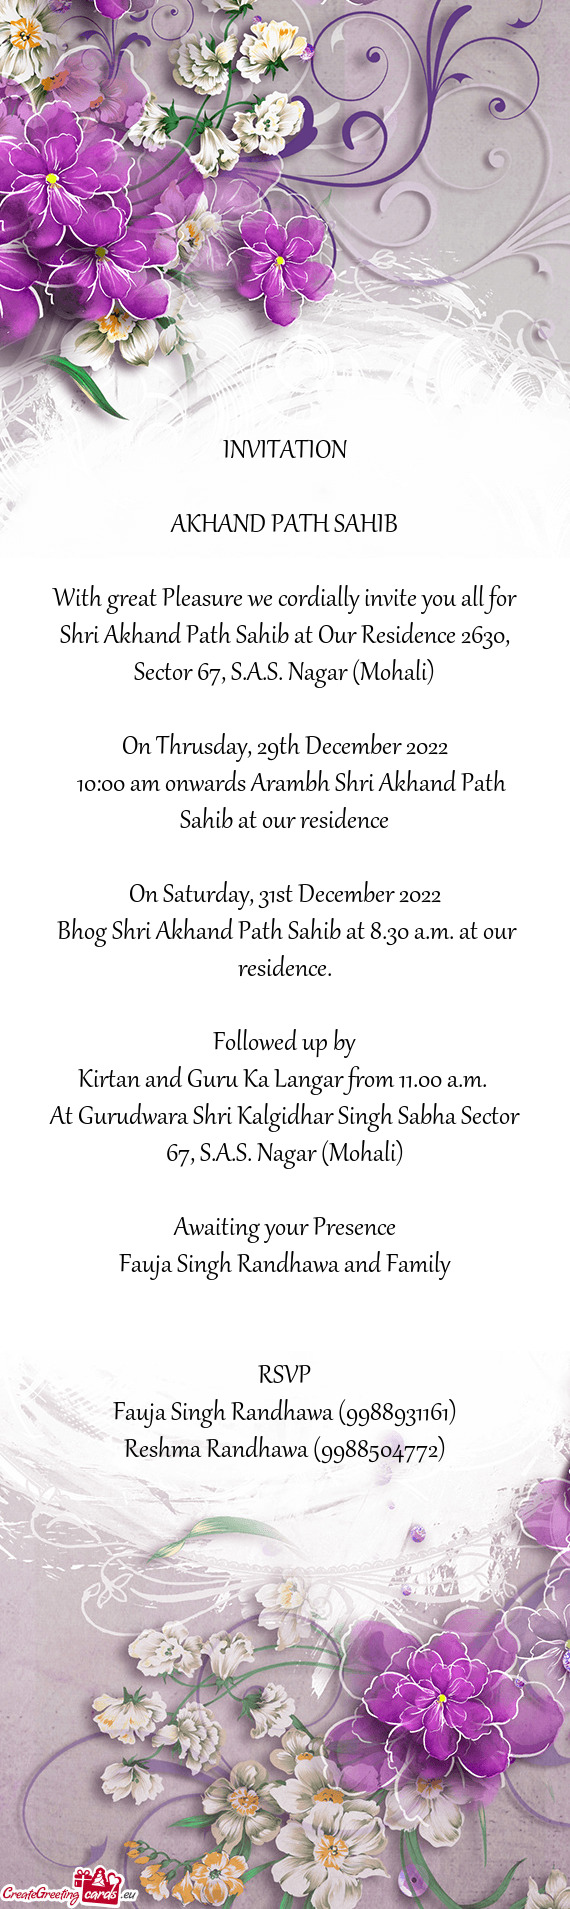 With great Pleasure we cordially invite you all for Shri Akhand Path Sahib at Our Residence 2630, Se